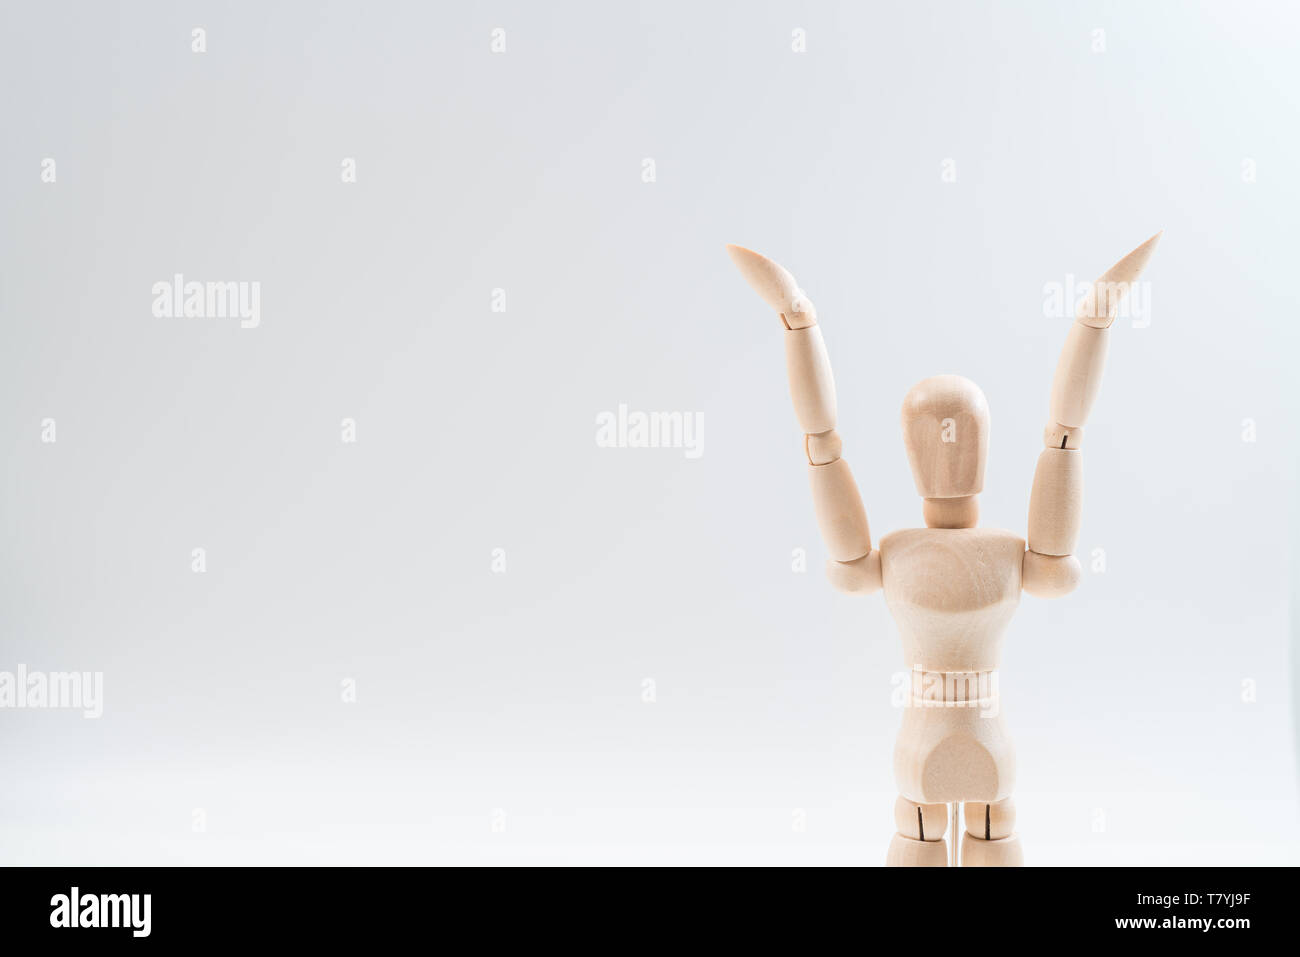 Raising Hands, Wooden dummy, Raising Hands on whiteBackground, copy space for your object or text Stock Photo